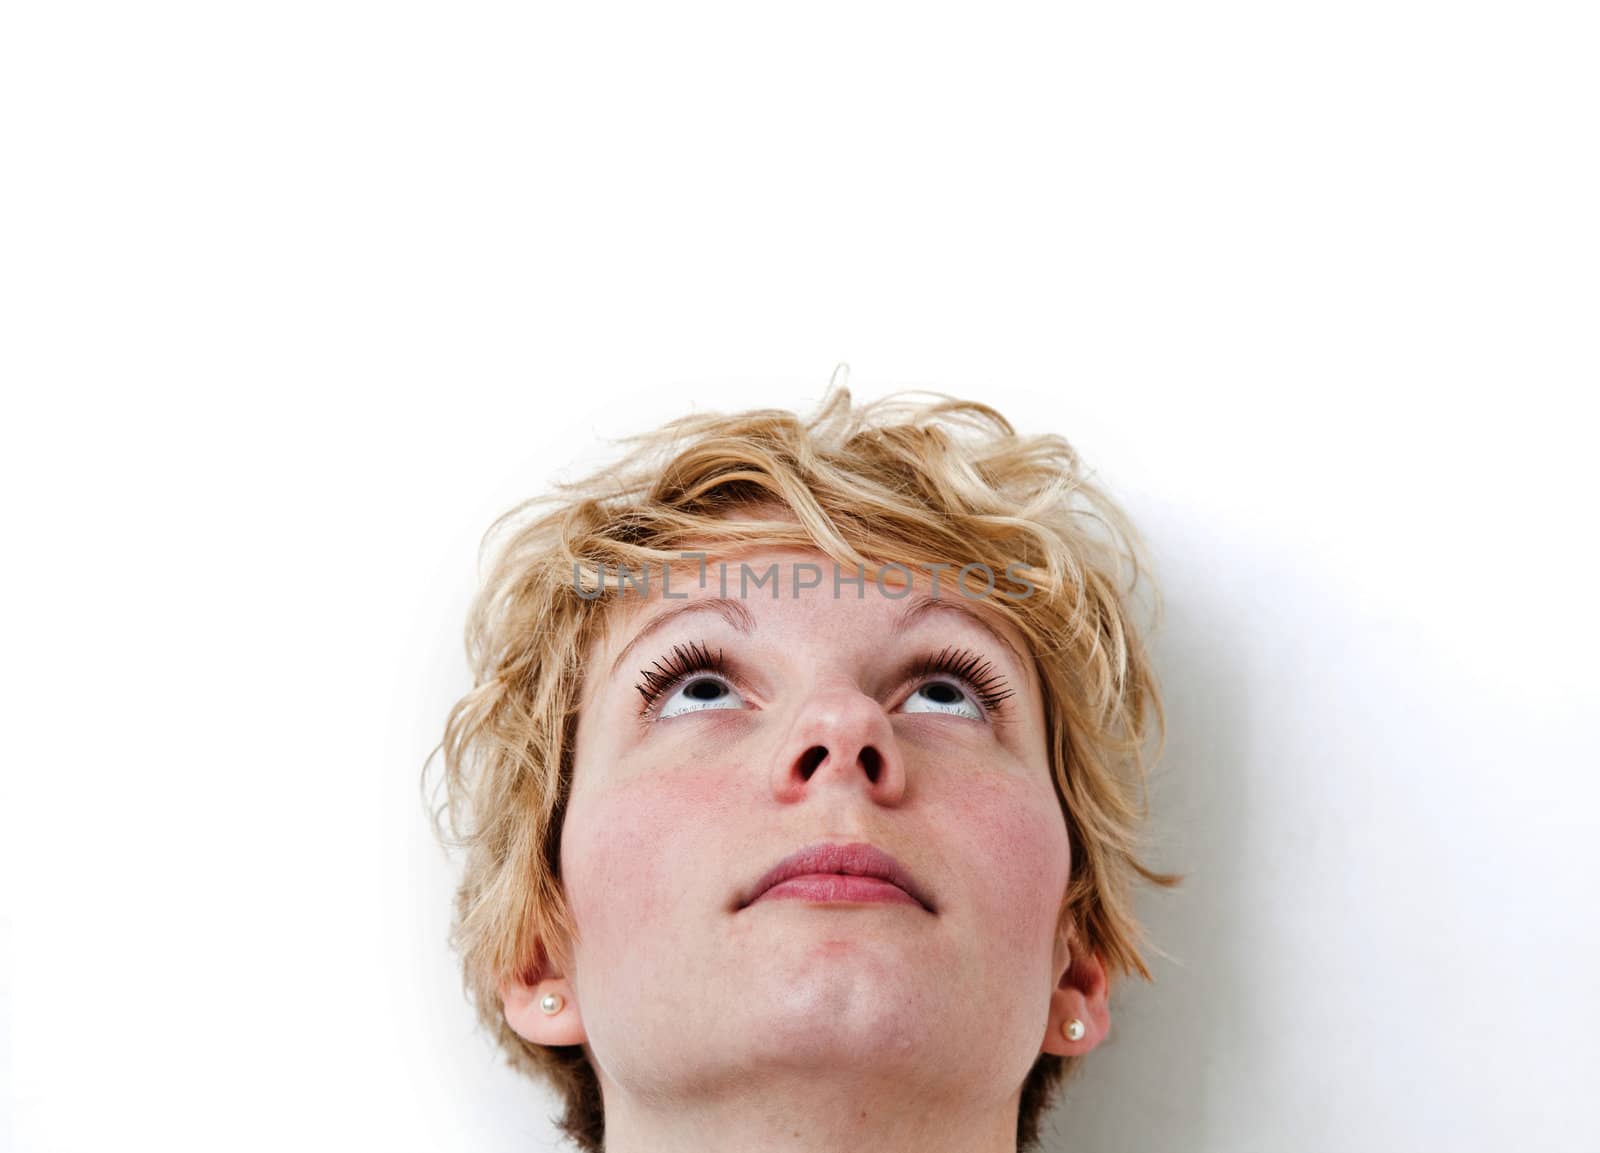 Young blond girl with morning look and mixed hairs on a white background